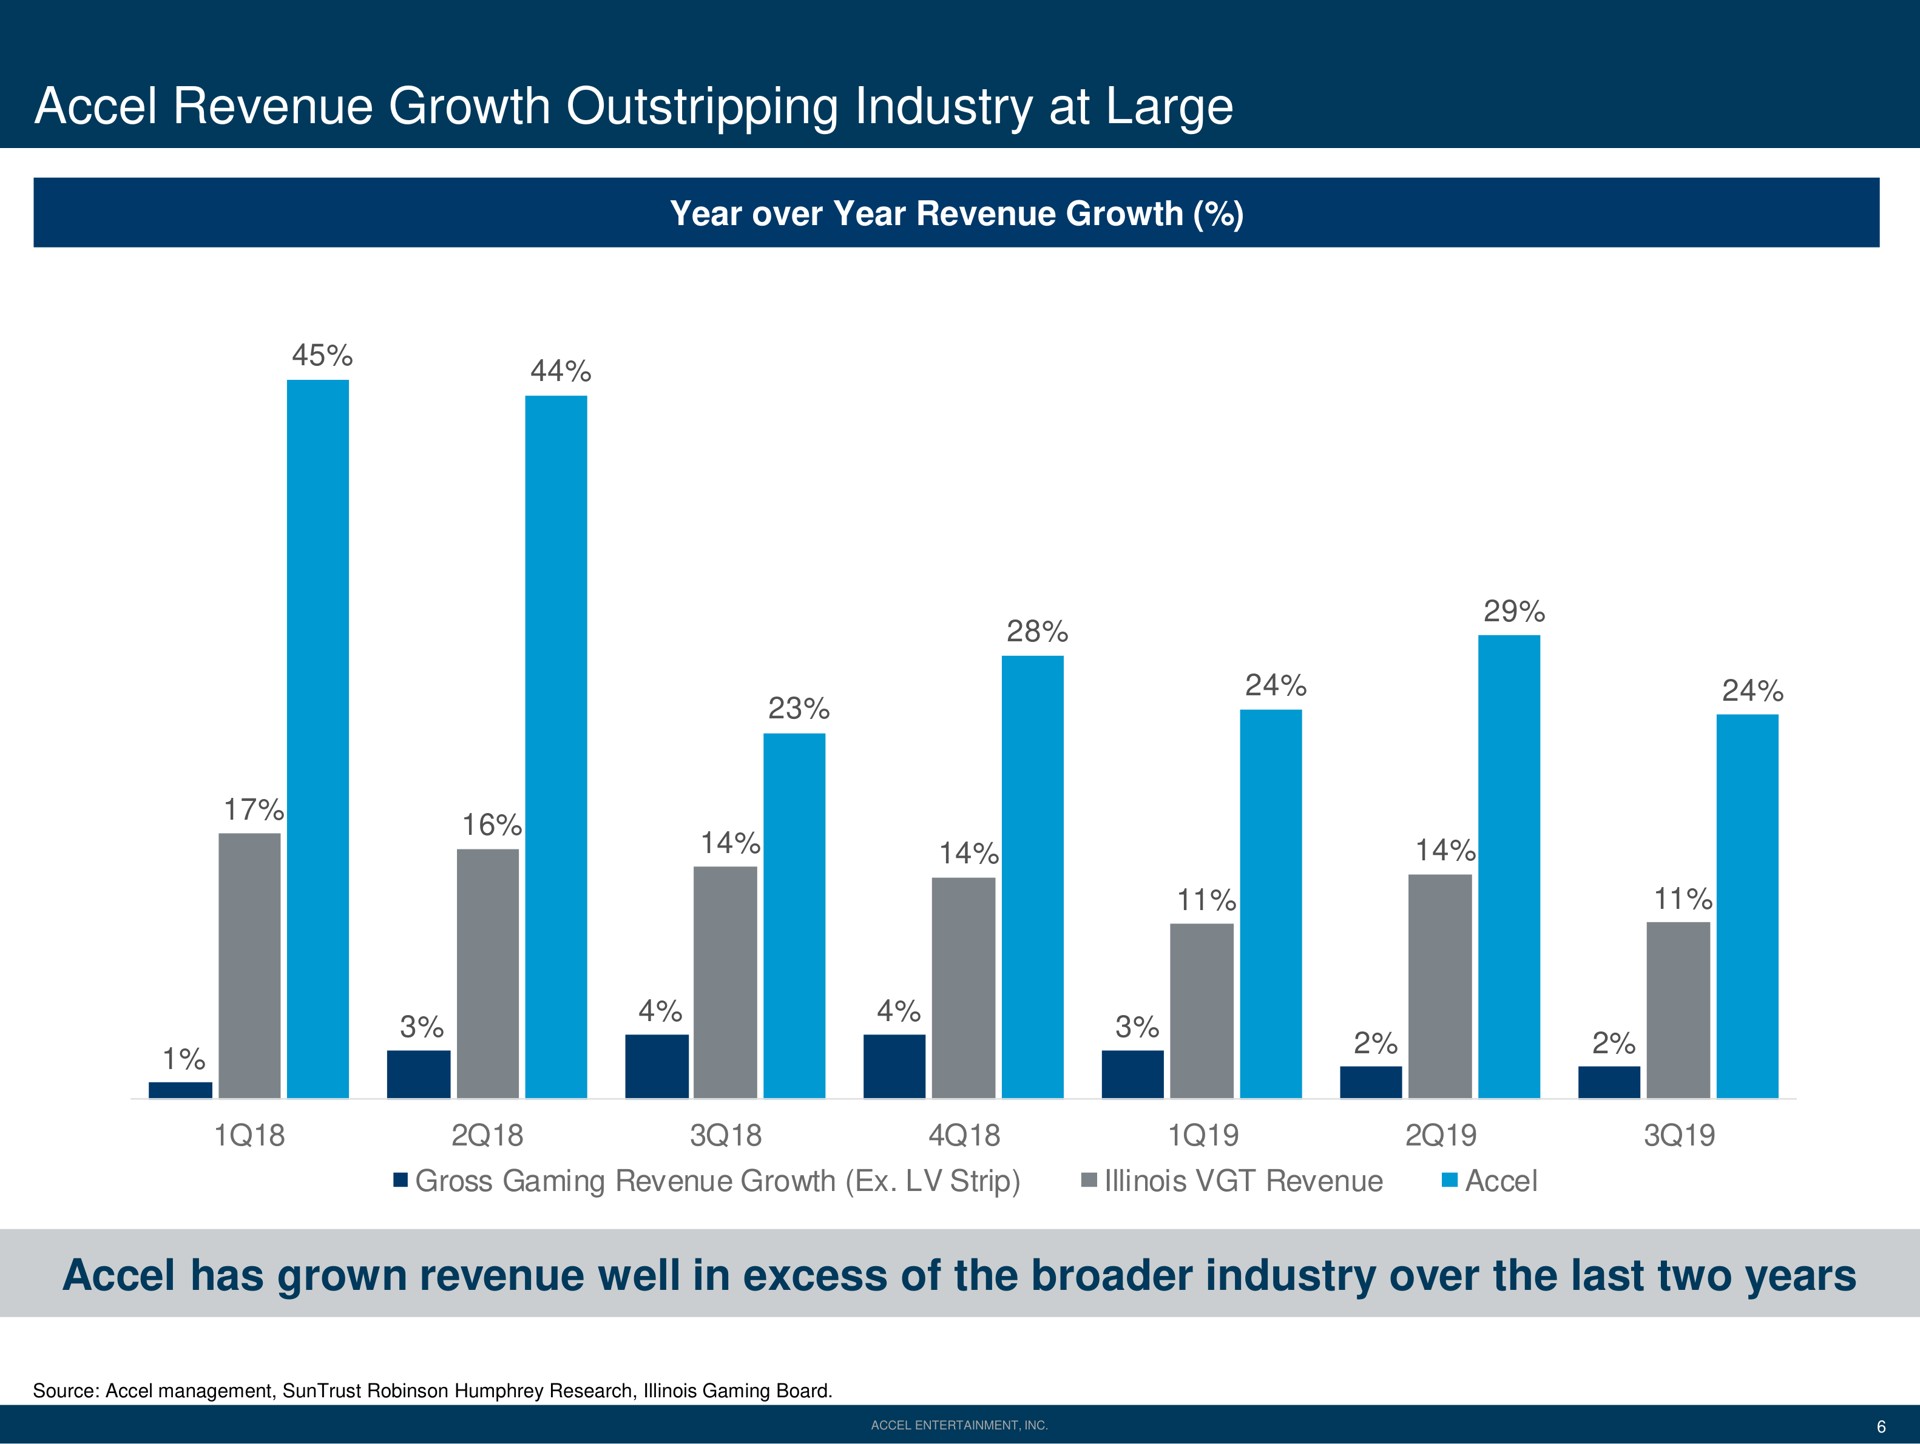 revenue growth outstripping industry at large has grown revenue well in excess of the industry over the last two years a | Accel Entertaiment